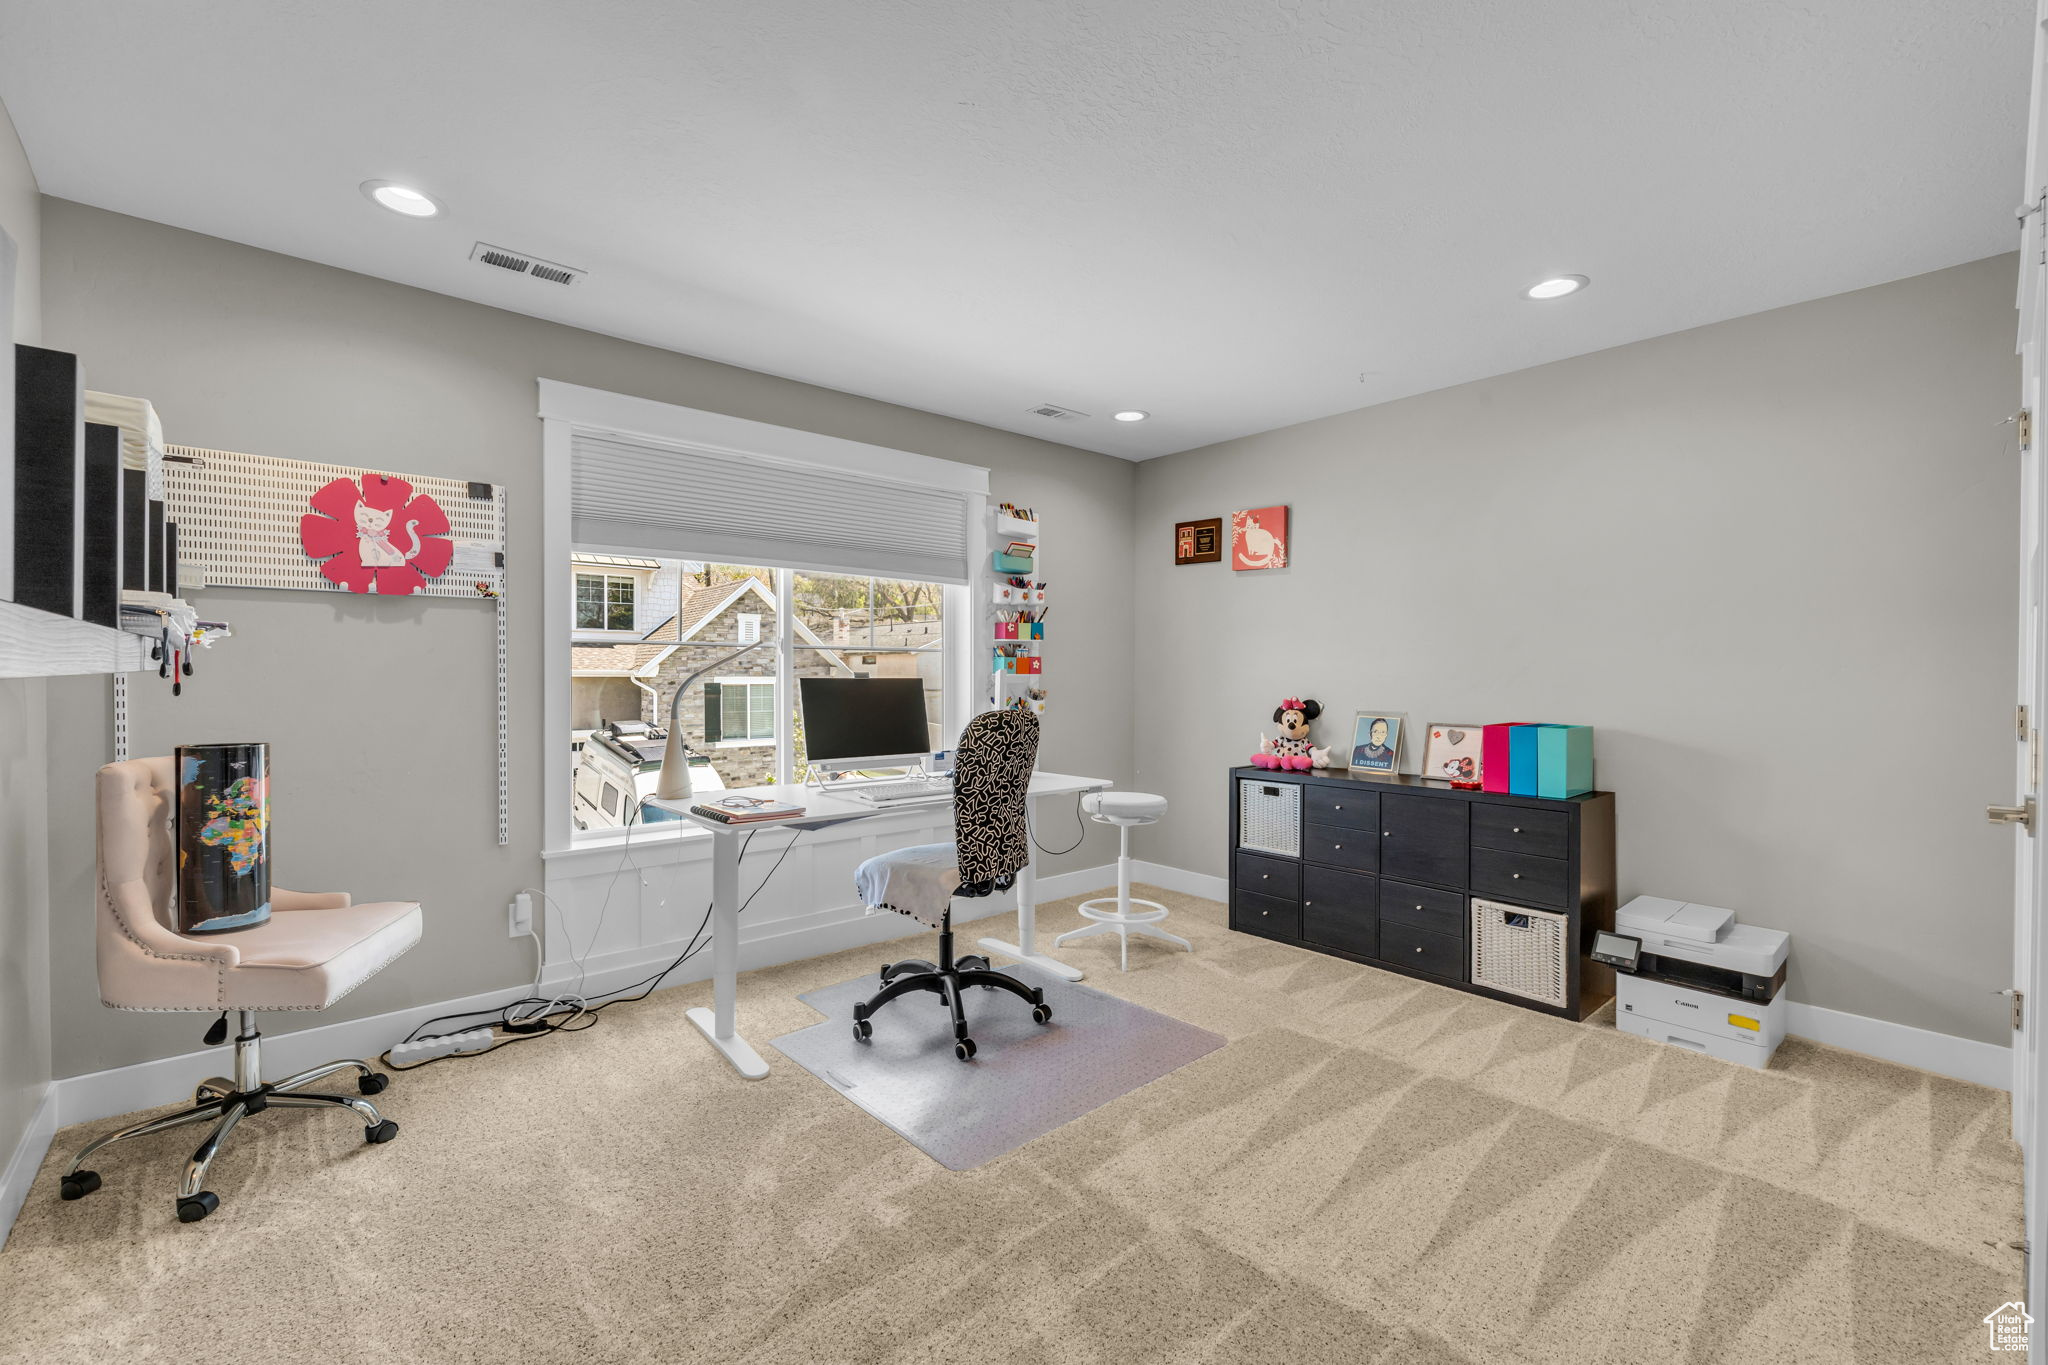 Office space with carpet